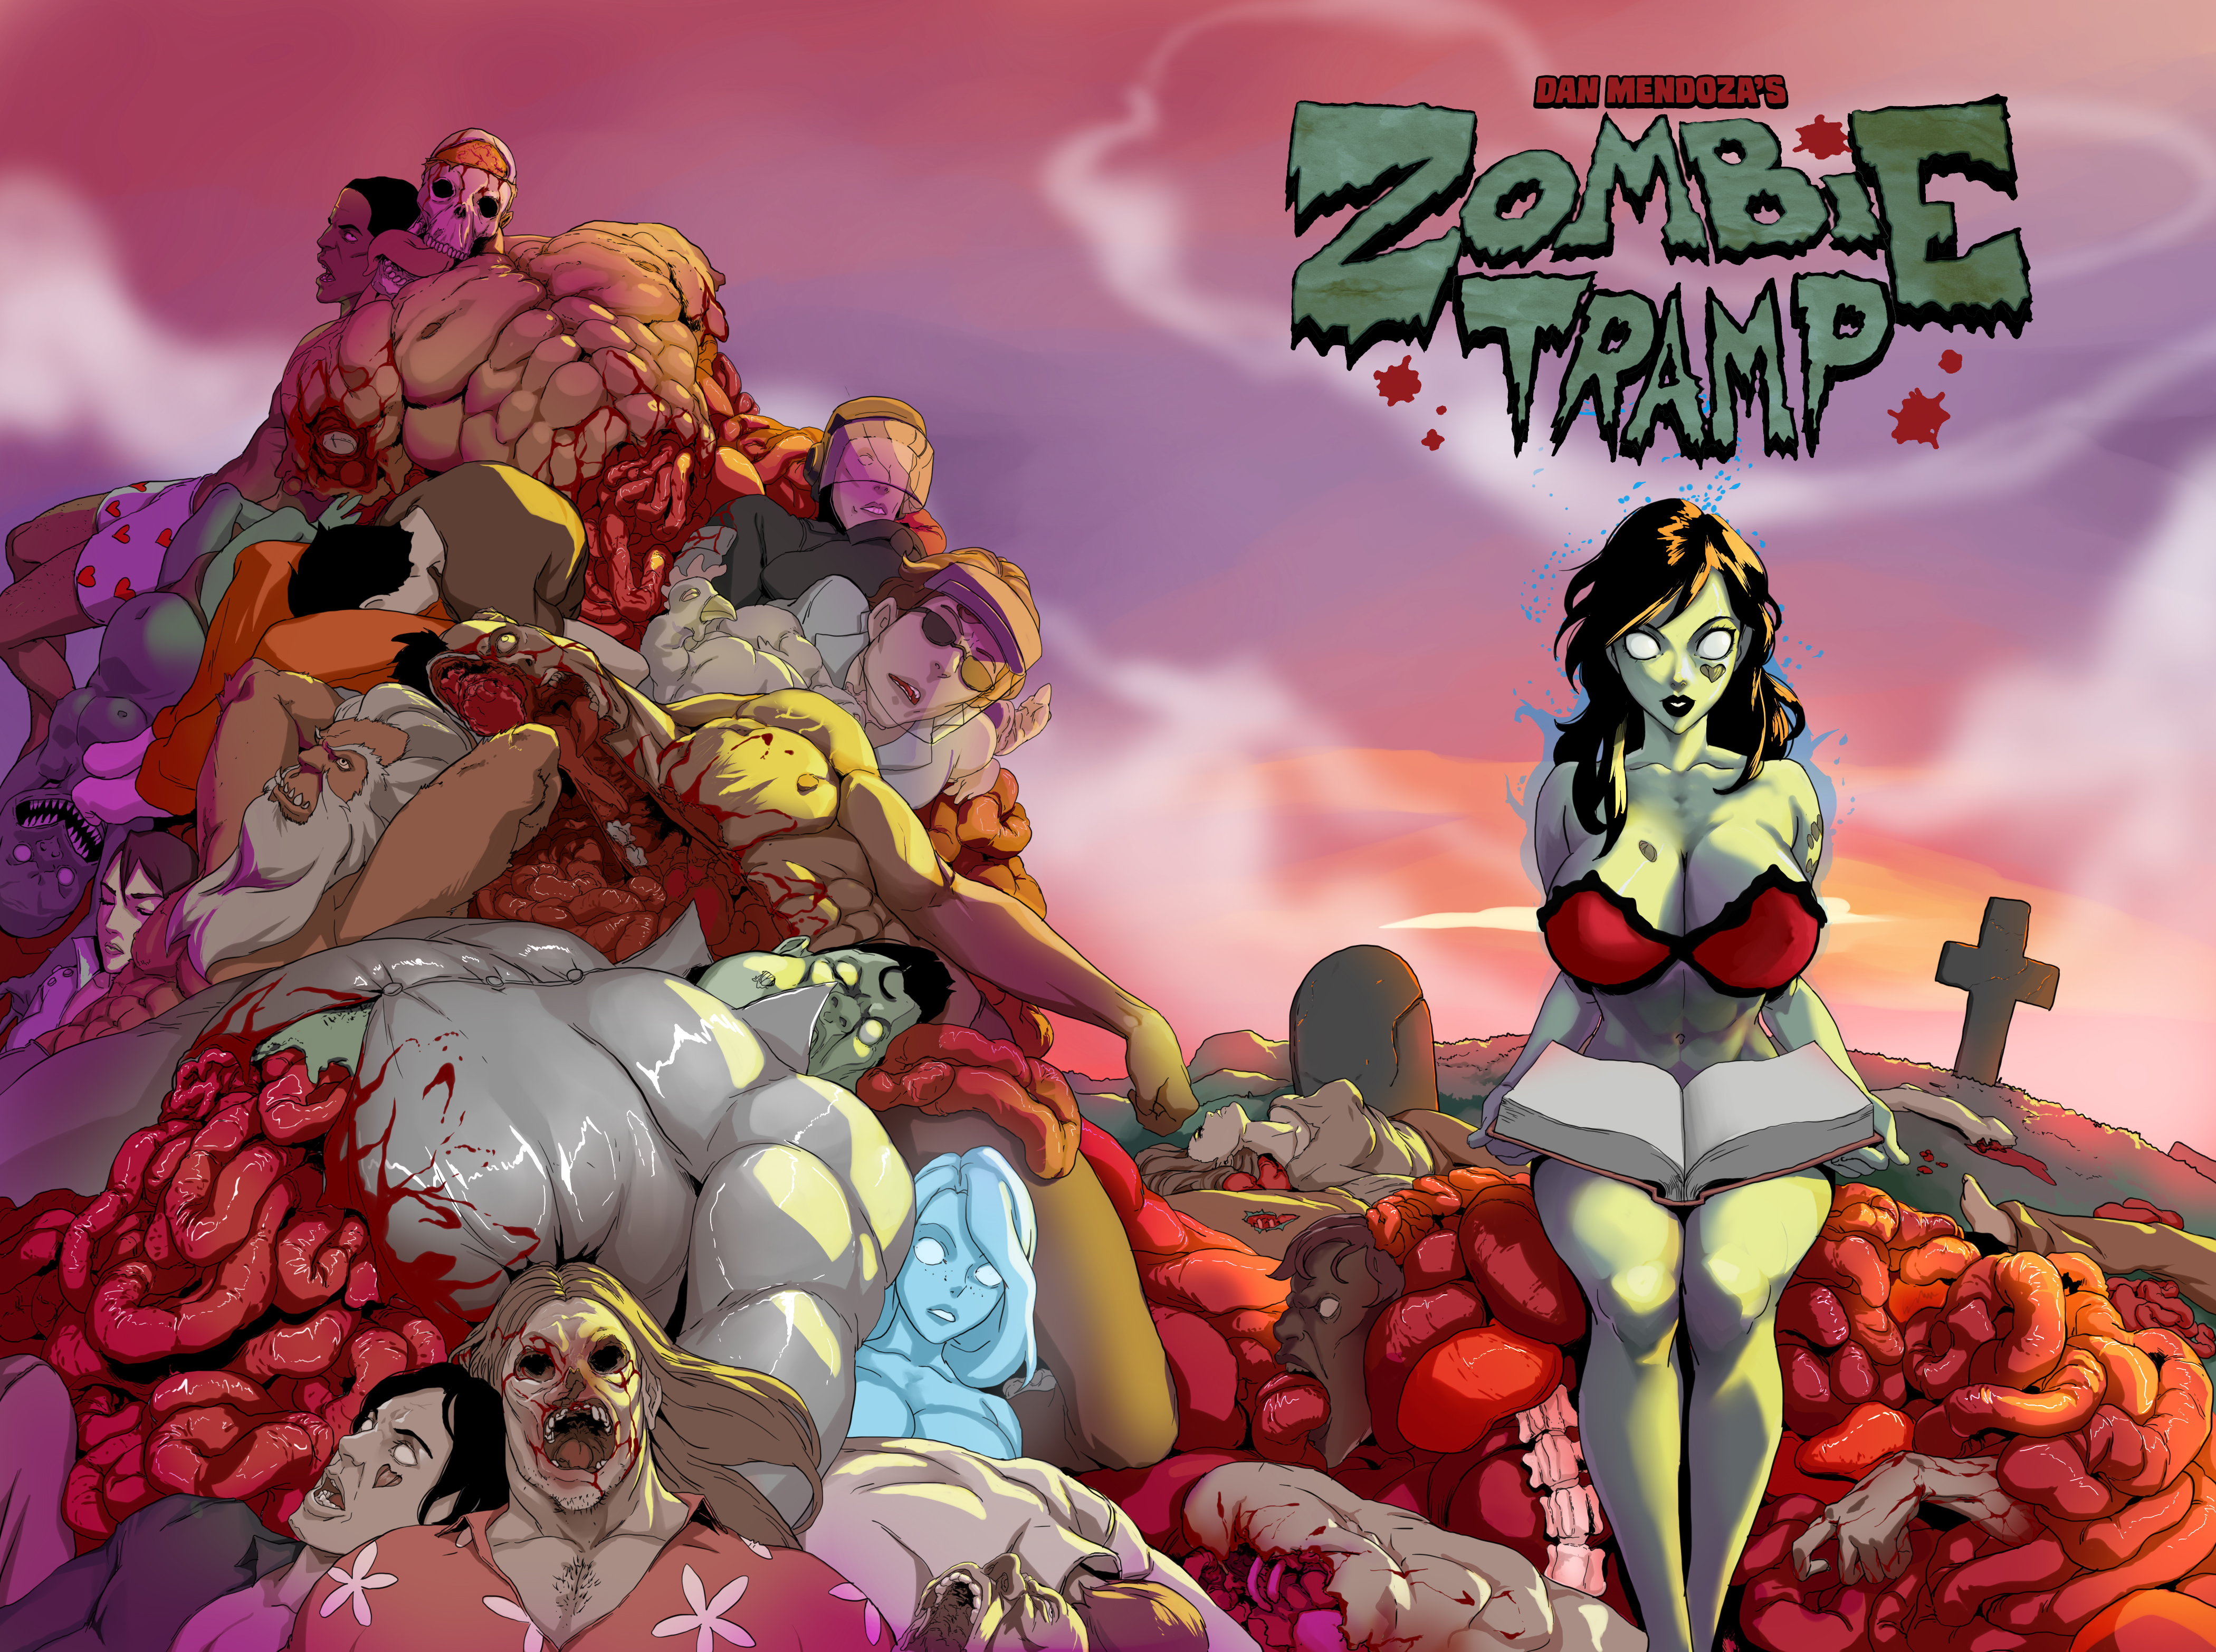 One reply on "Zombie Tramp Gets the Deluxe Treatment" .